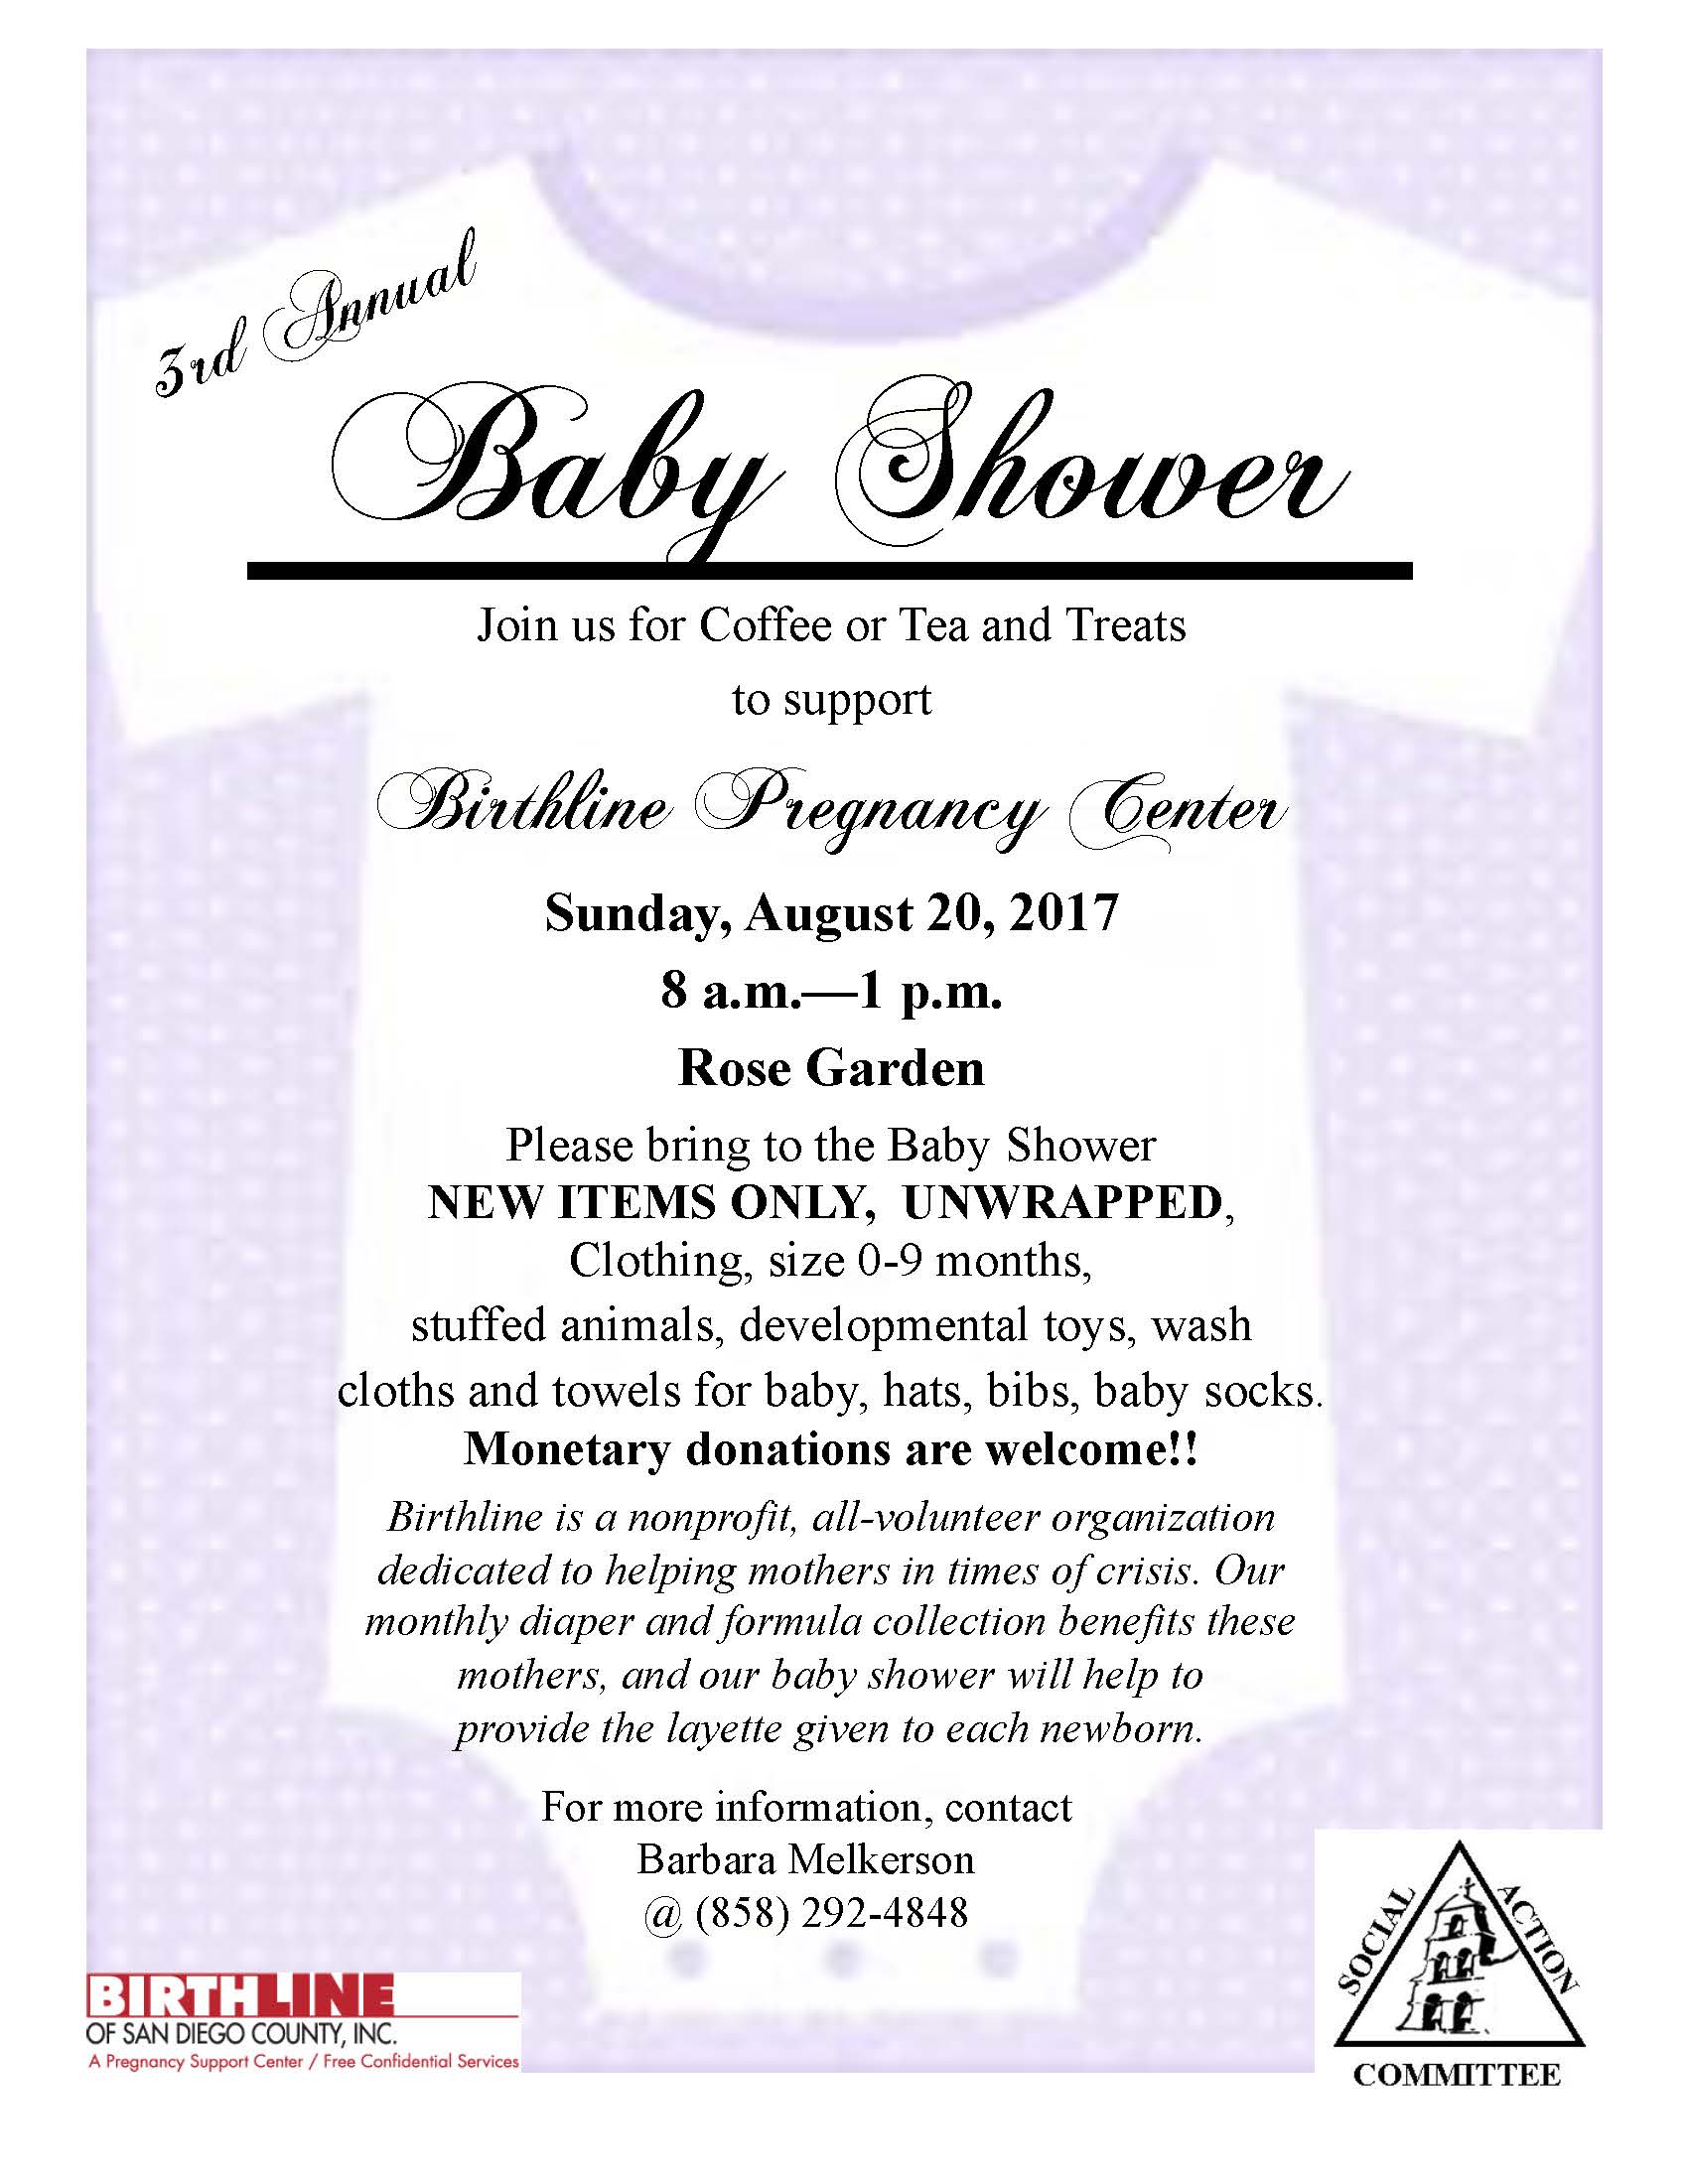 3rd Annual Baby Shower